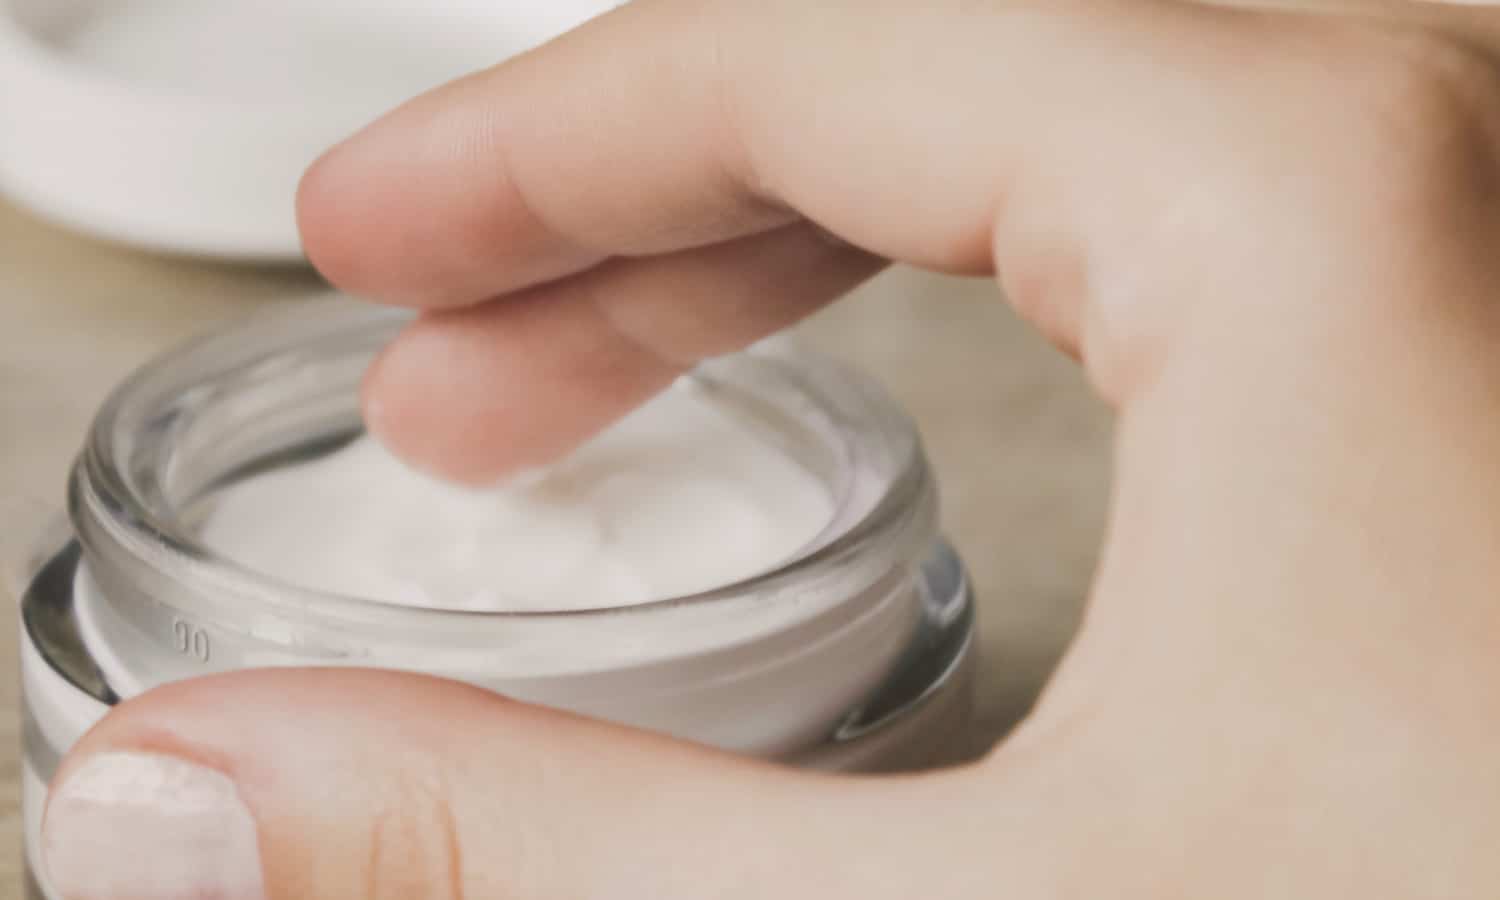 Common Moisturizer Ingredients That Can Harm Your Skin